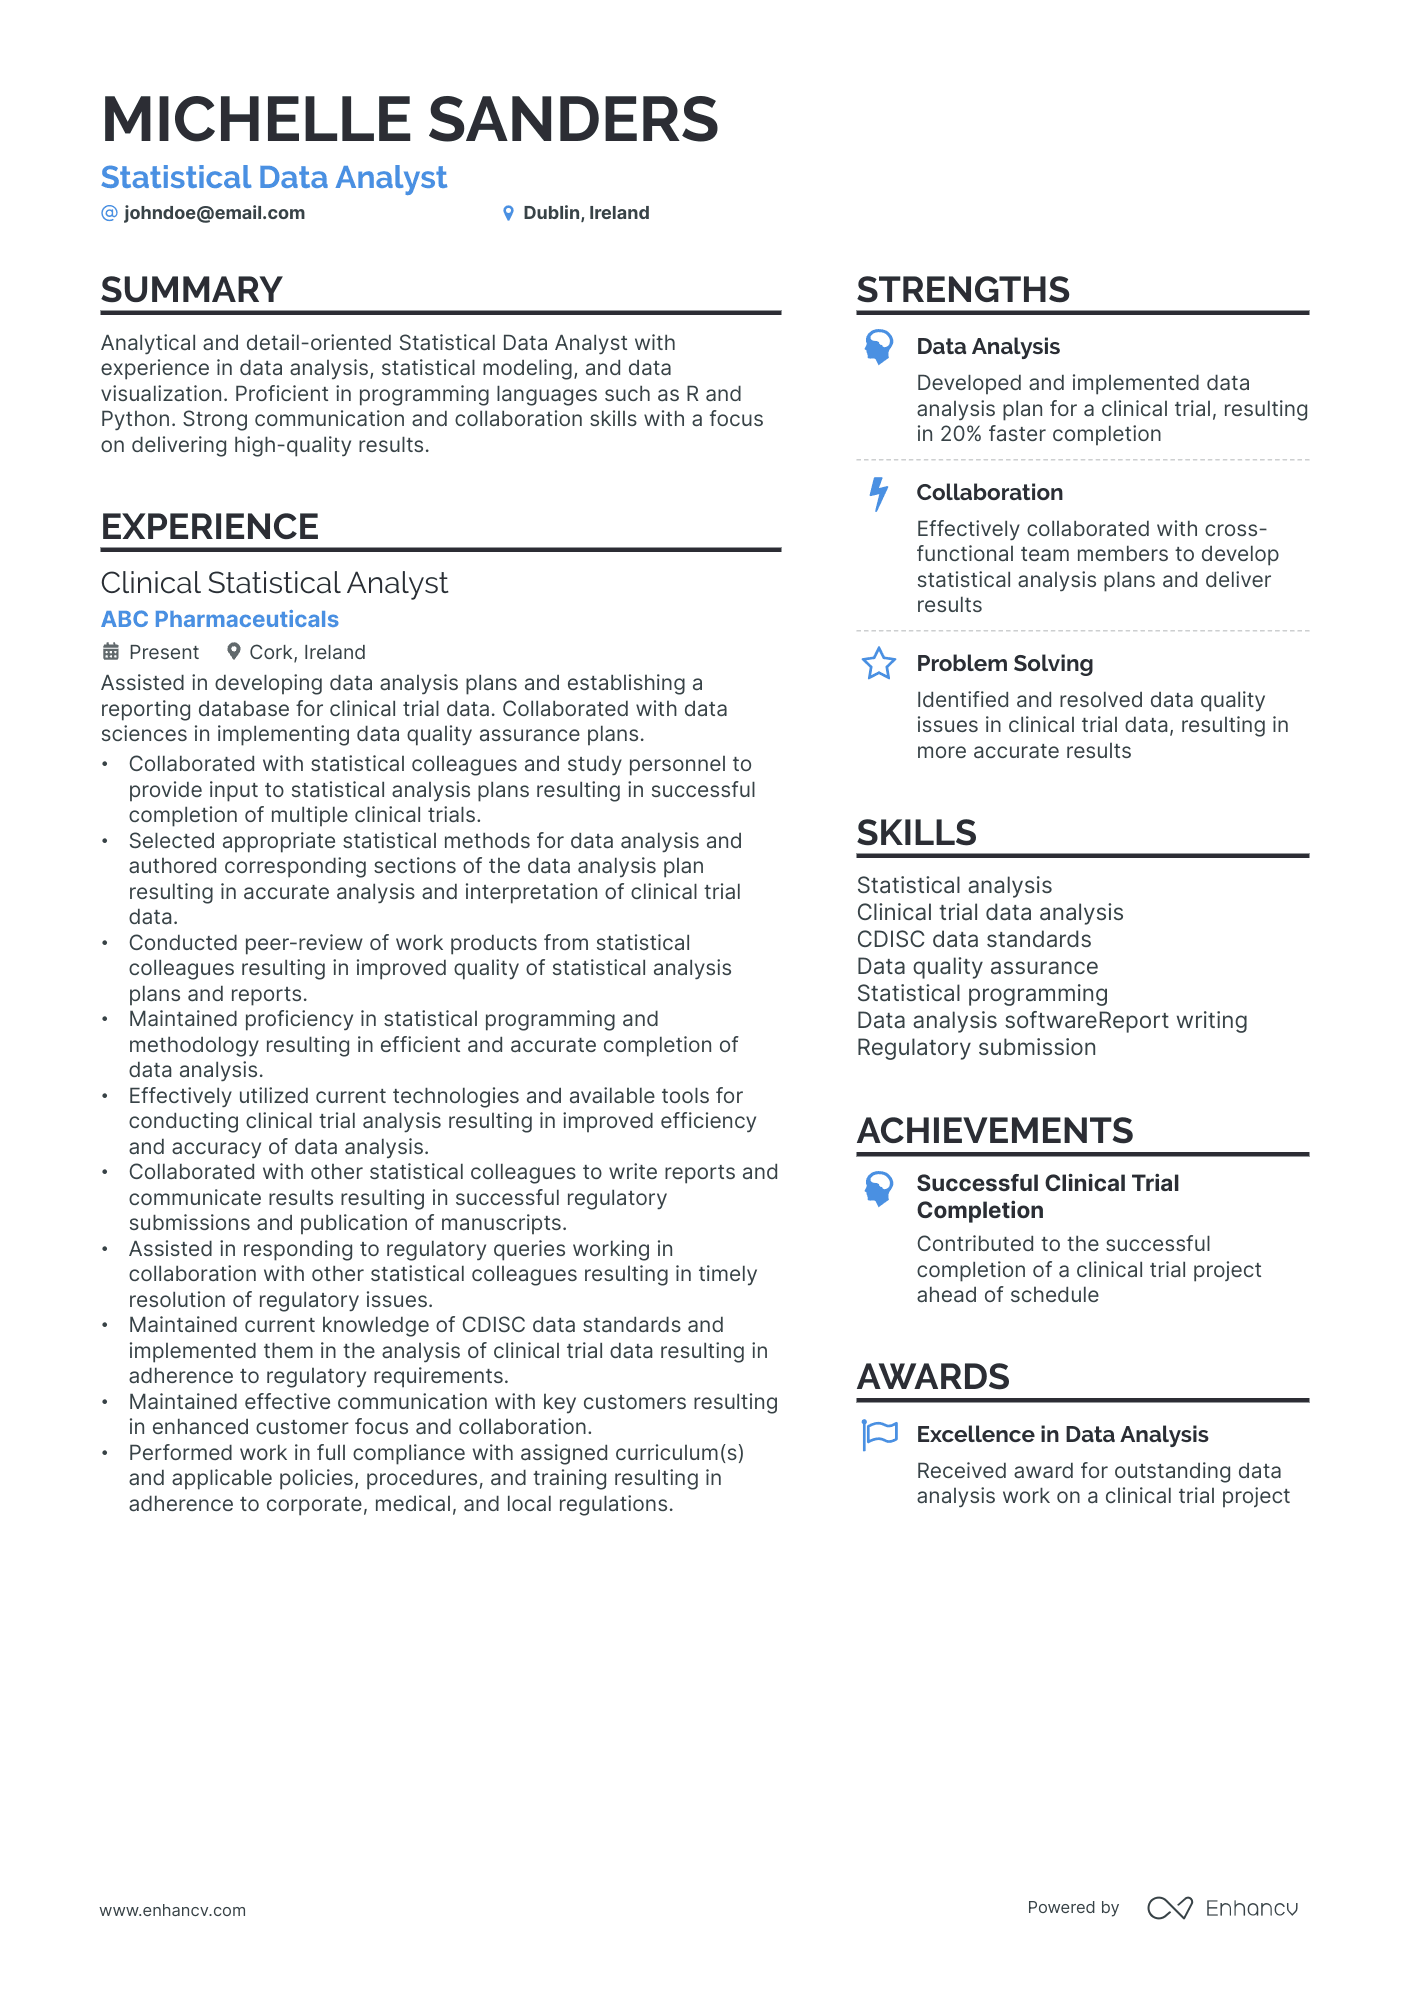 Statistical Data Analyst resume example